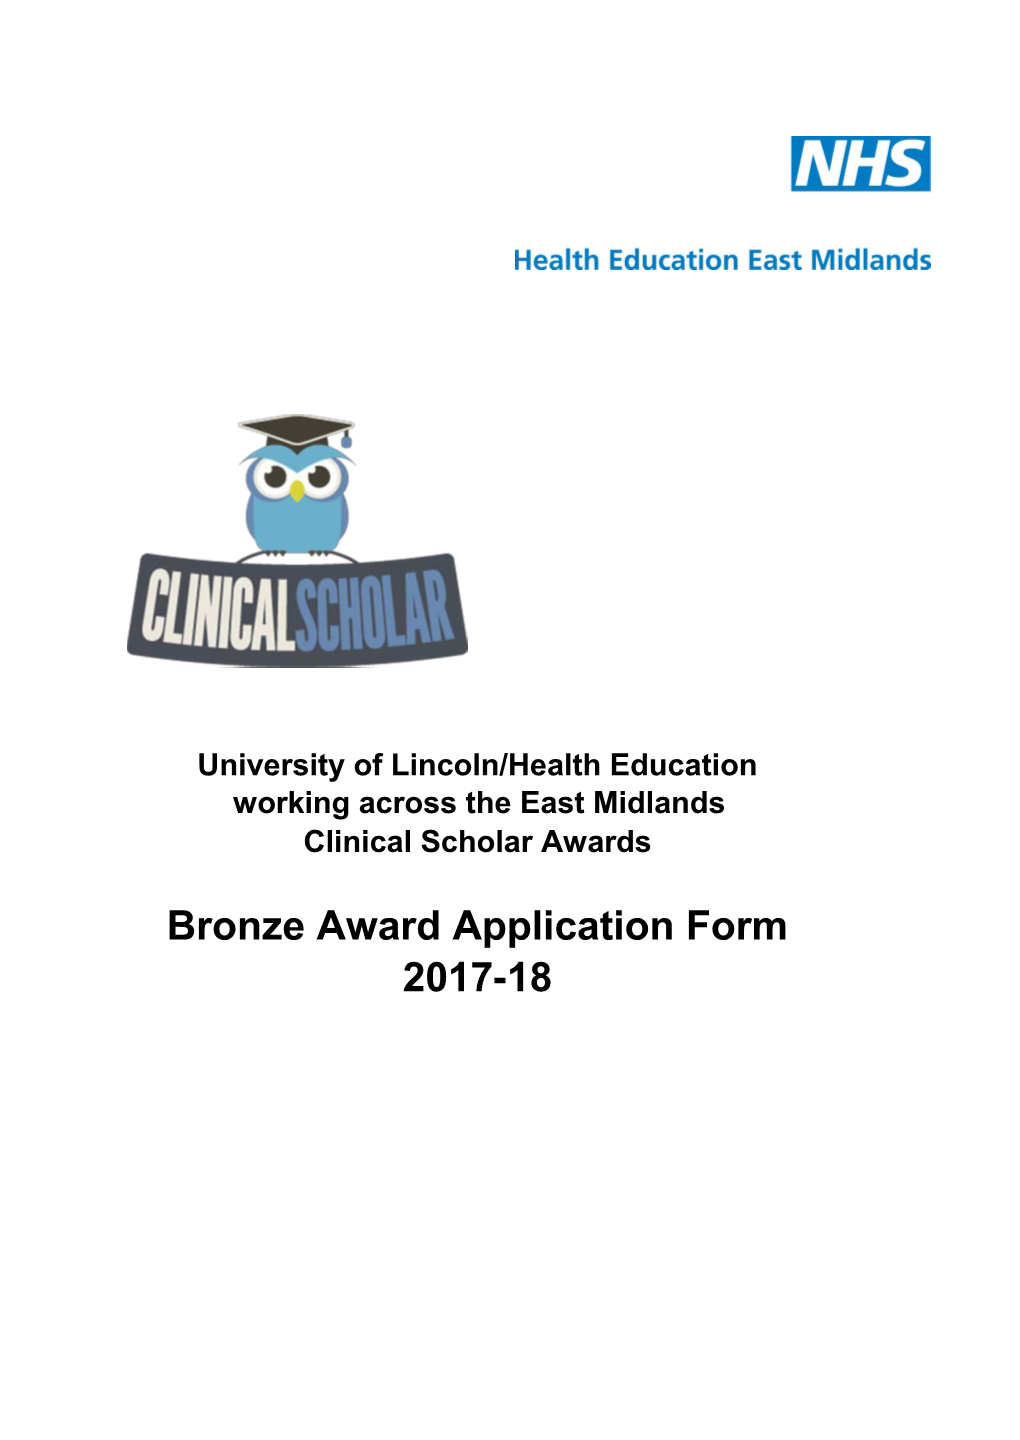 University of Lincoln/Health Education Working Across the East Midlands